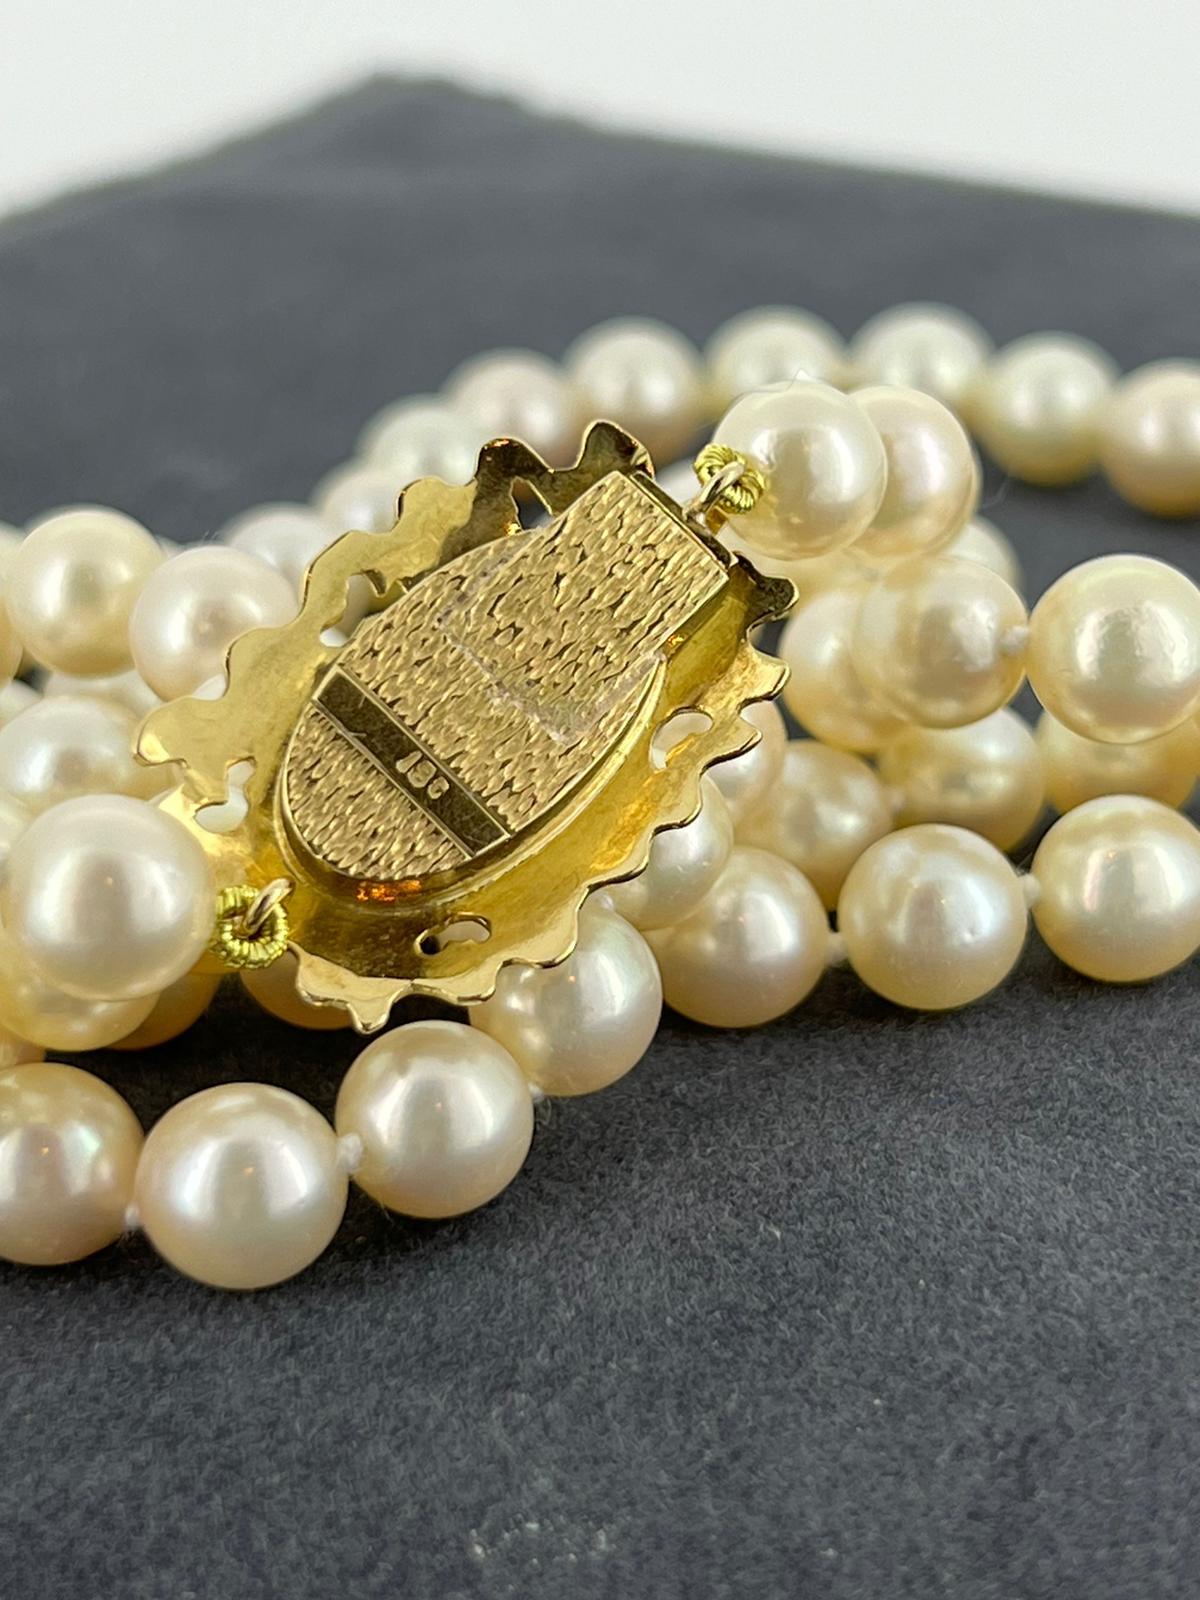 This Magnificent South Sea Pearl Strand is

of desirable opera length – 78cm (30.7 inches), 

comprising 98 South Sea Pearls, 

of 8.5mm each, 

of sought- after round shape, 

of fine mirror-like lustre – 

(one of the most important factors when